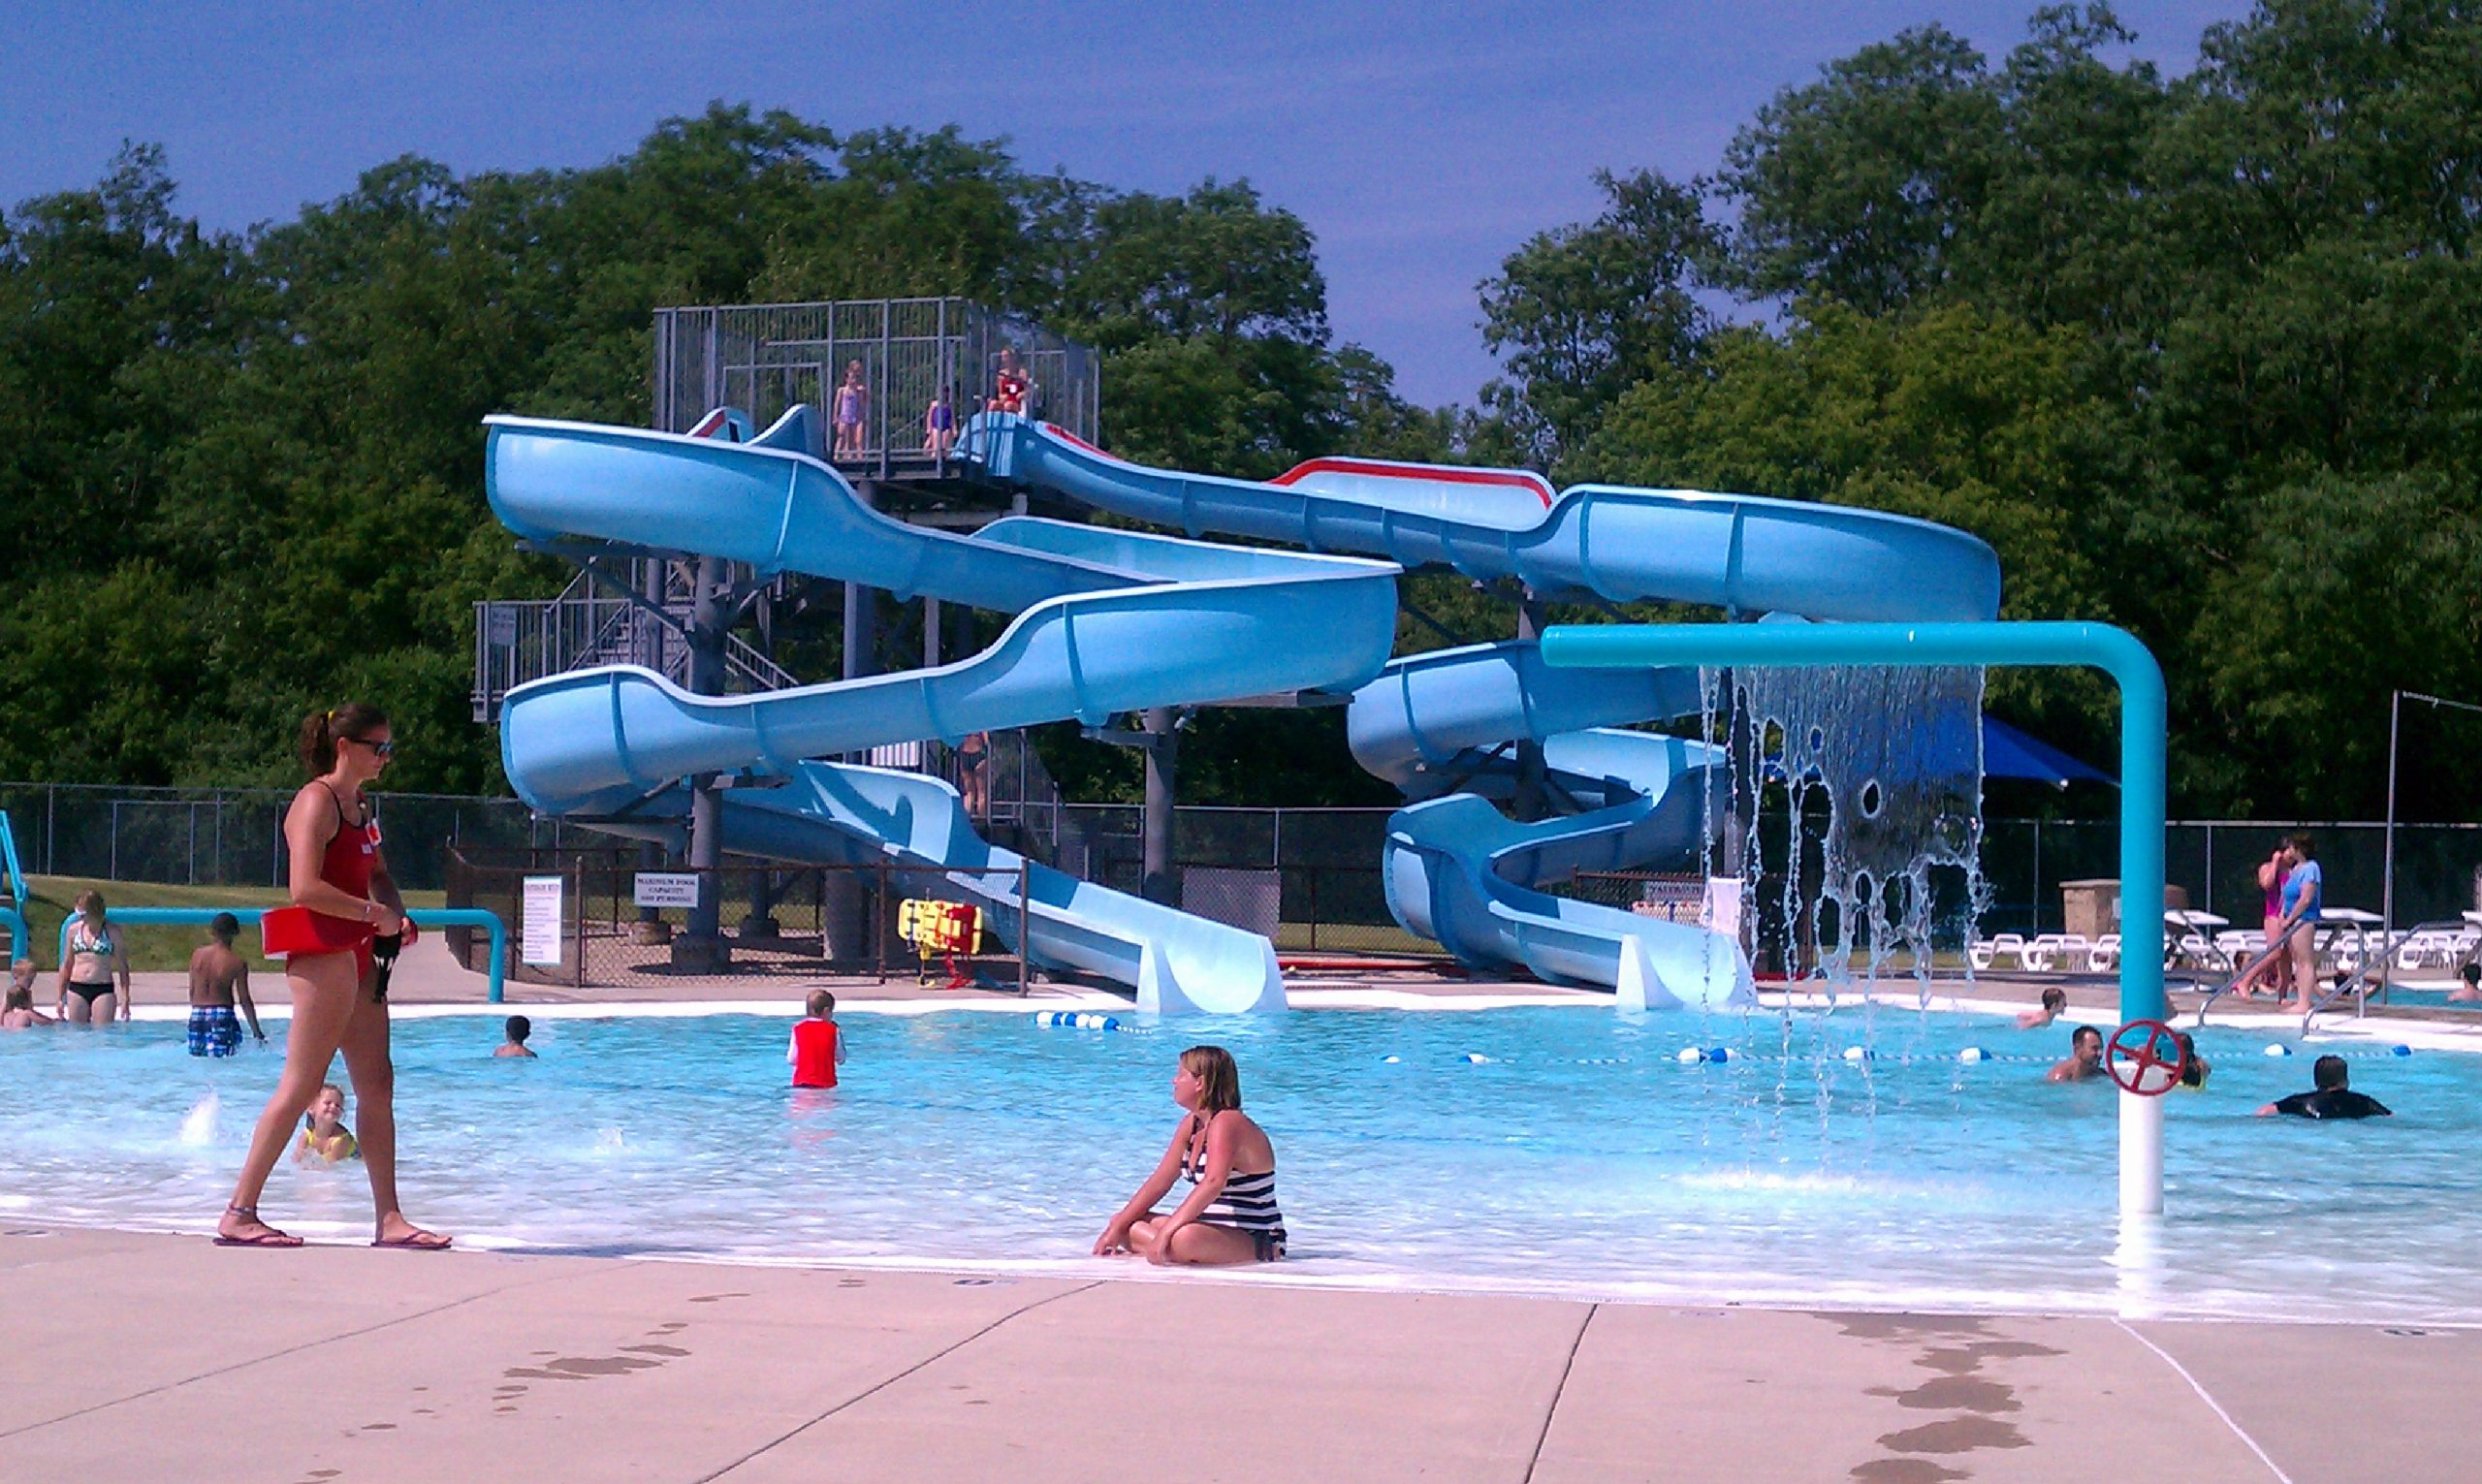 a group of people playing in a pool with a water slide.